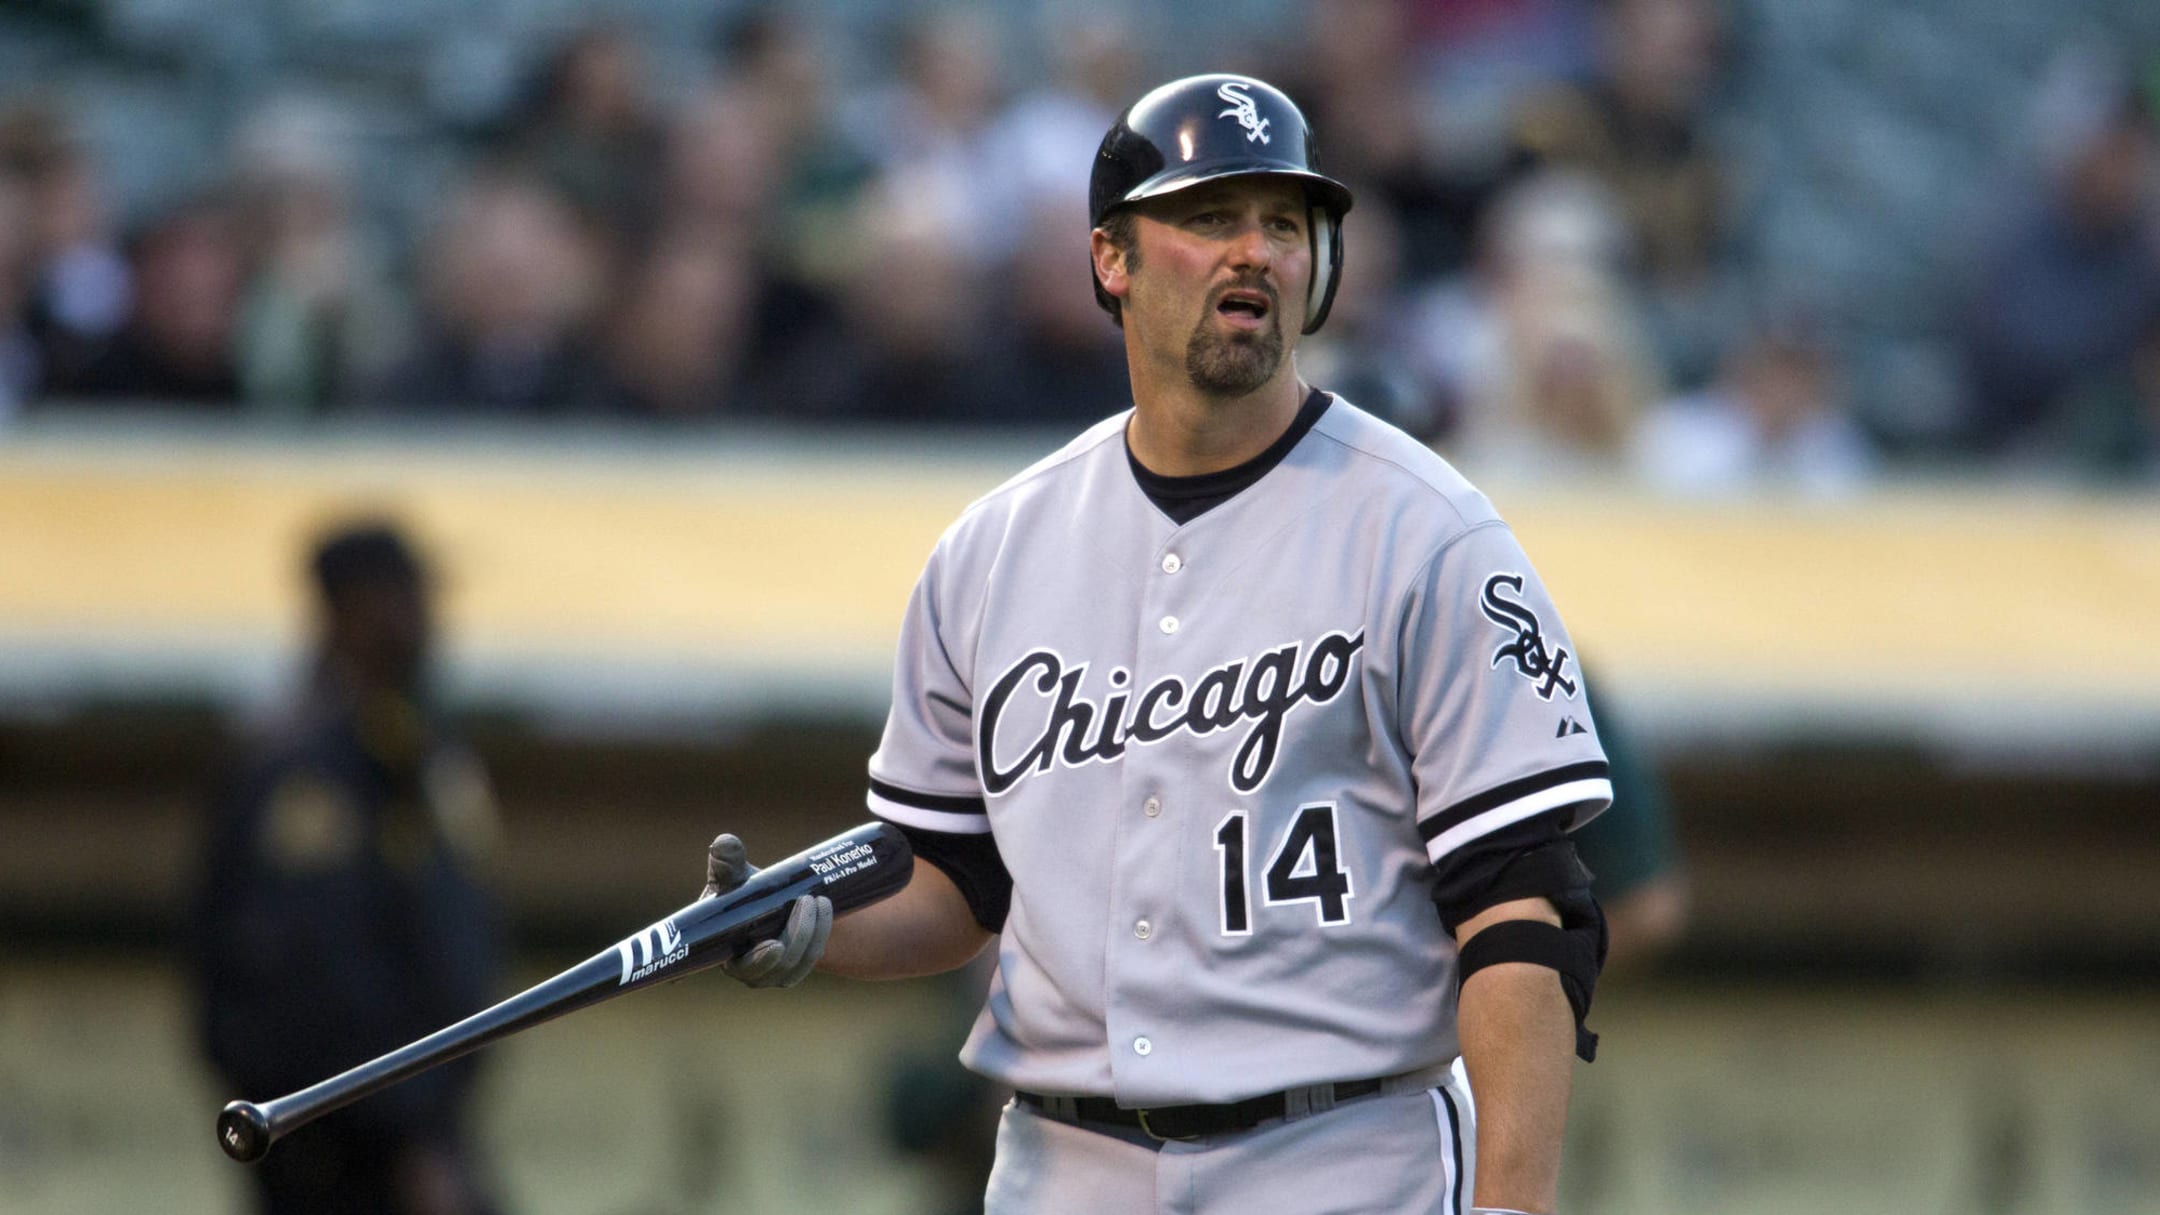 Paul Konerko says MLBPA shouldn't be 'scapegoats' in battle with